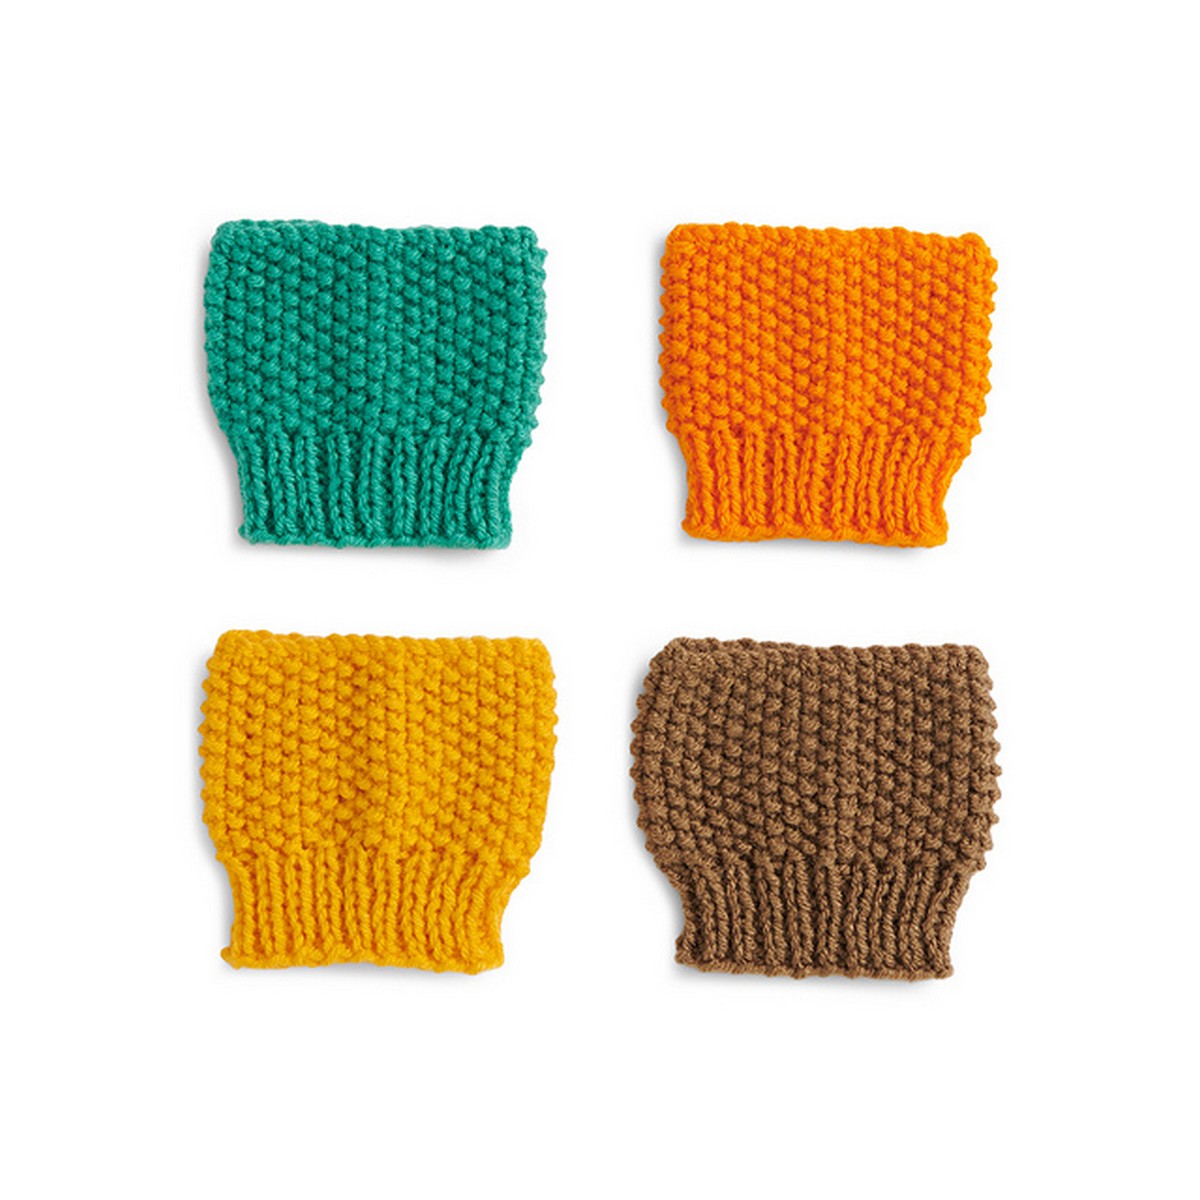 Knit Cup Cozy Patterns